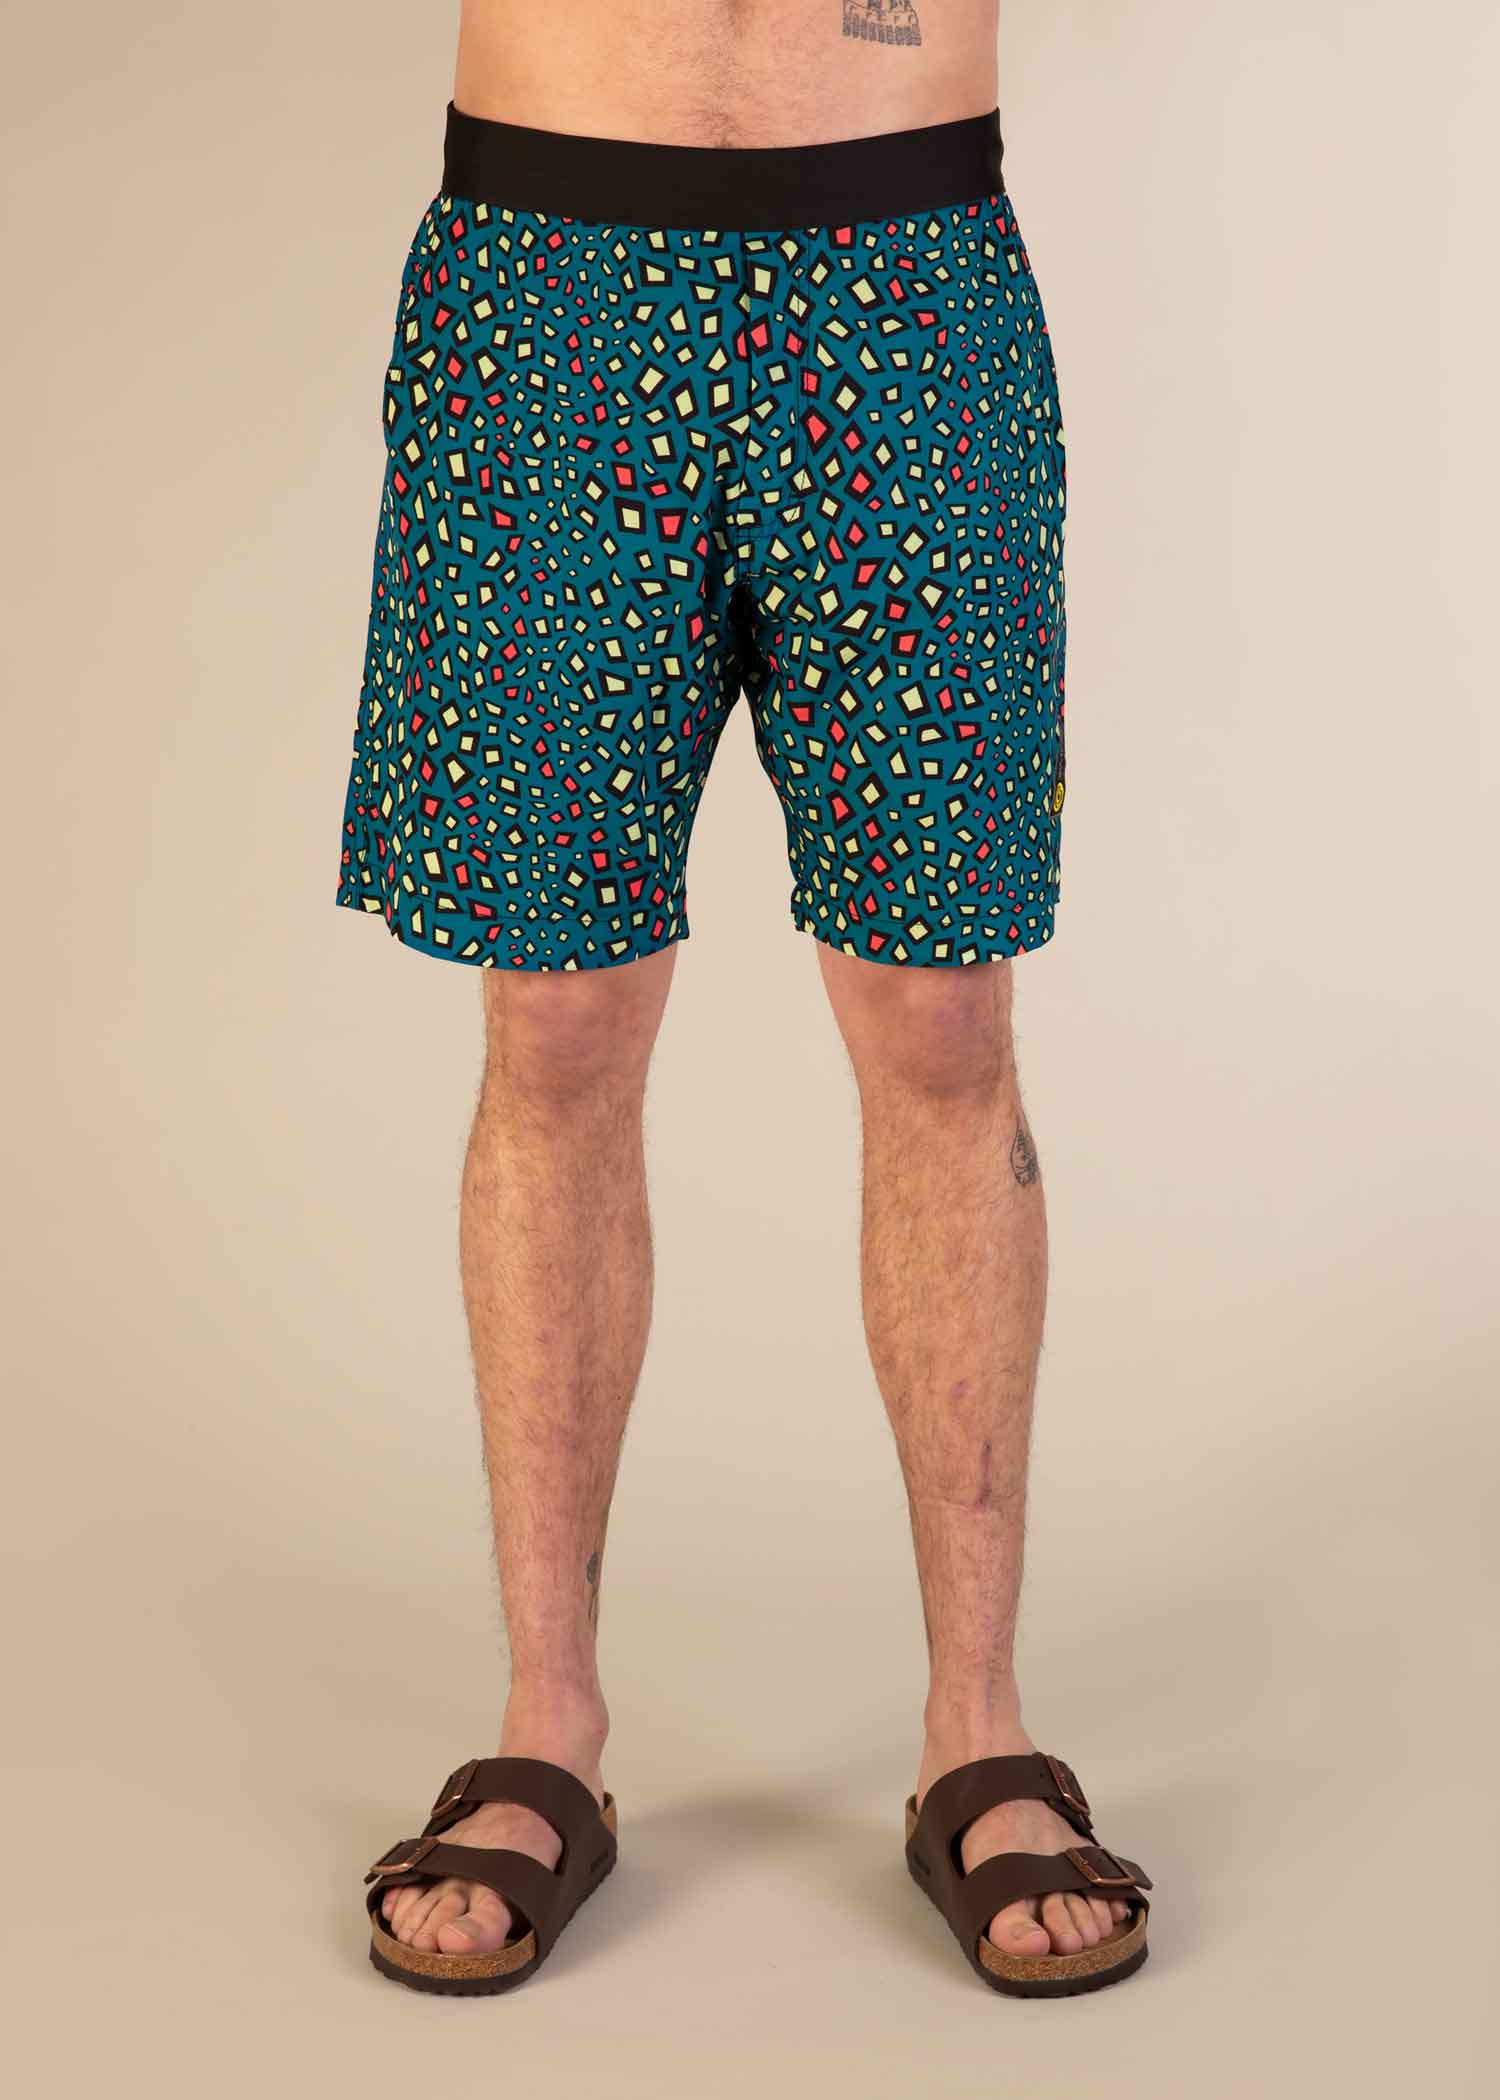 3RD ROCK Adventure shorts in minimal gecko - Kai is 6ft 1" with a 32" waist and is wearing a 32. M